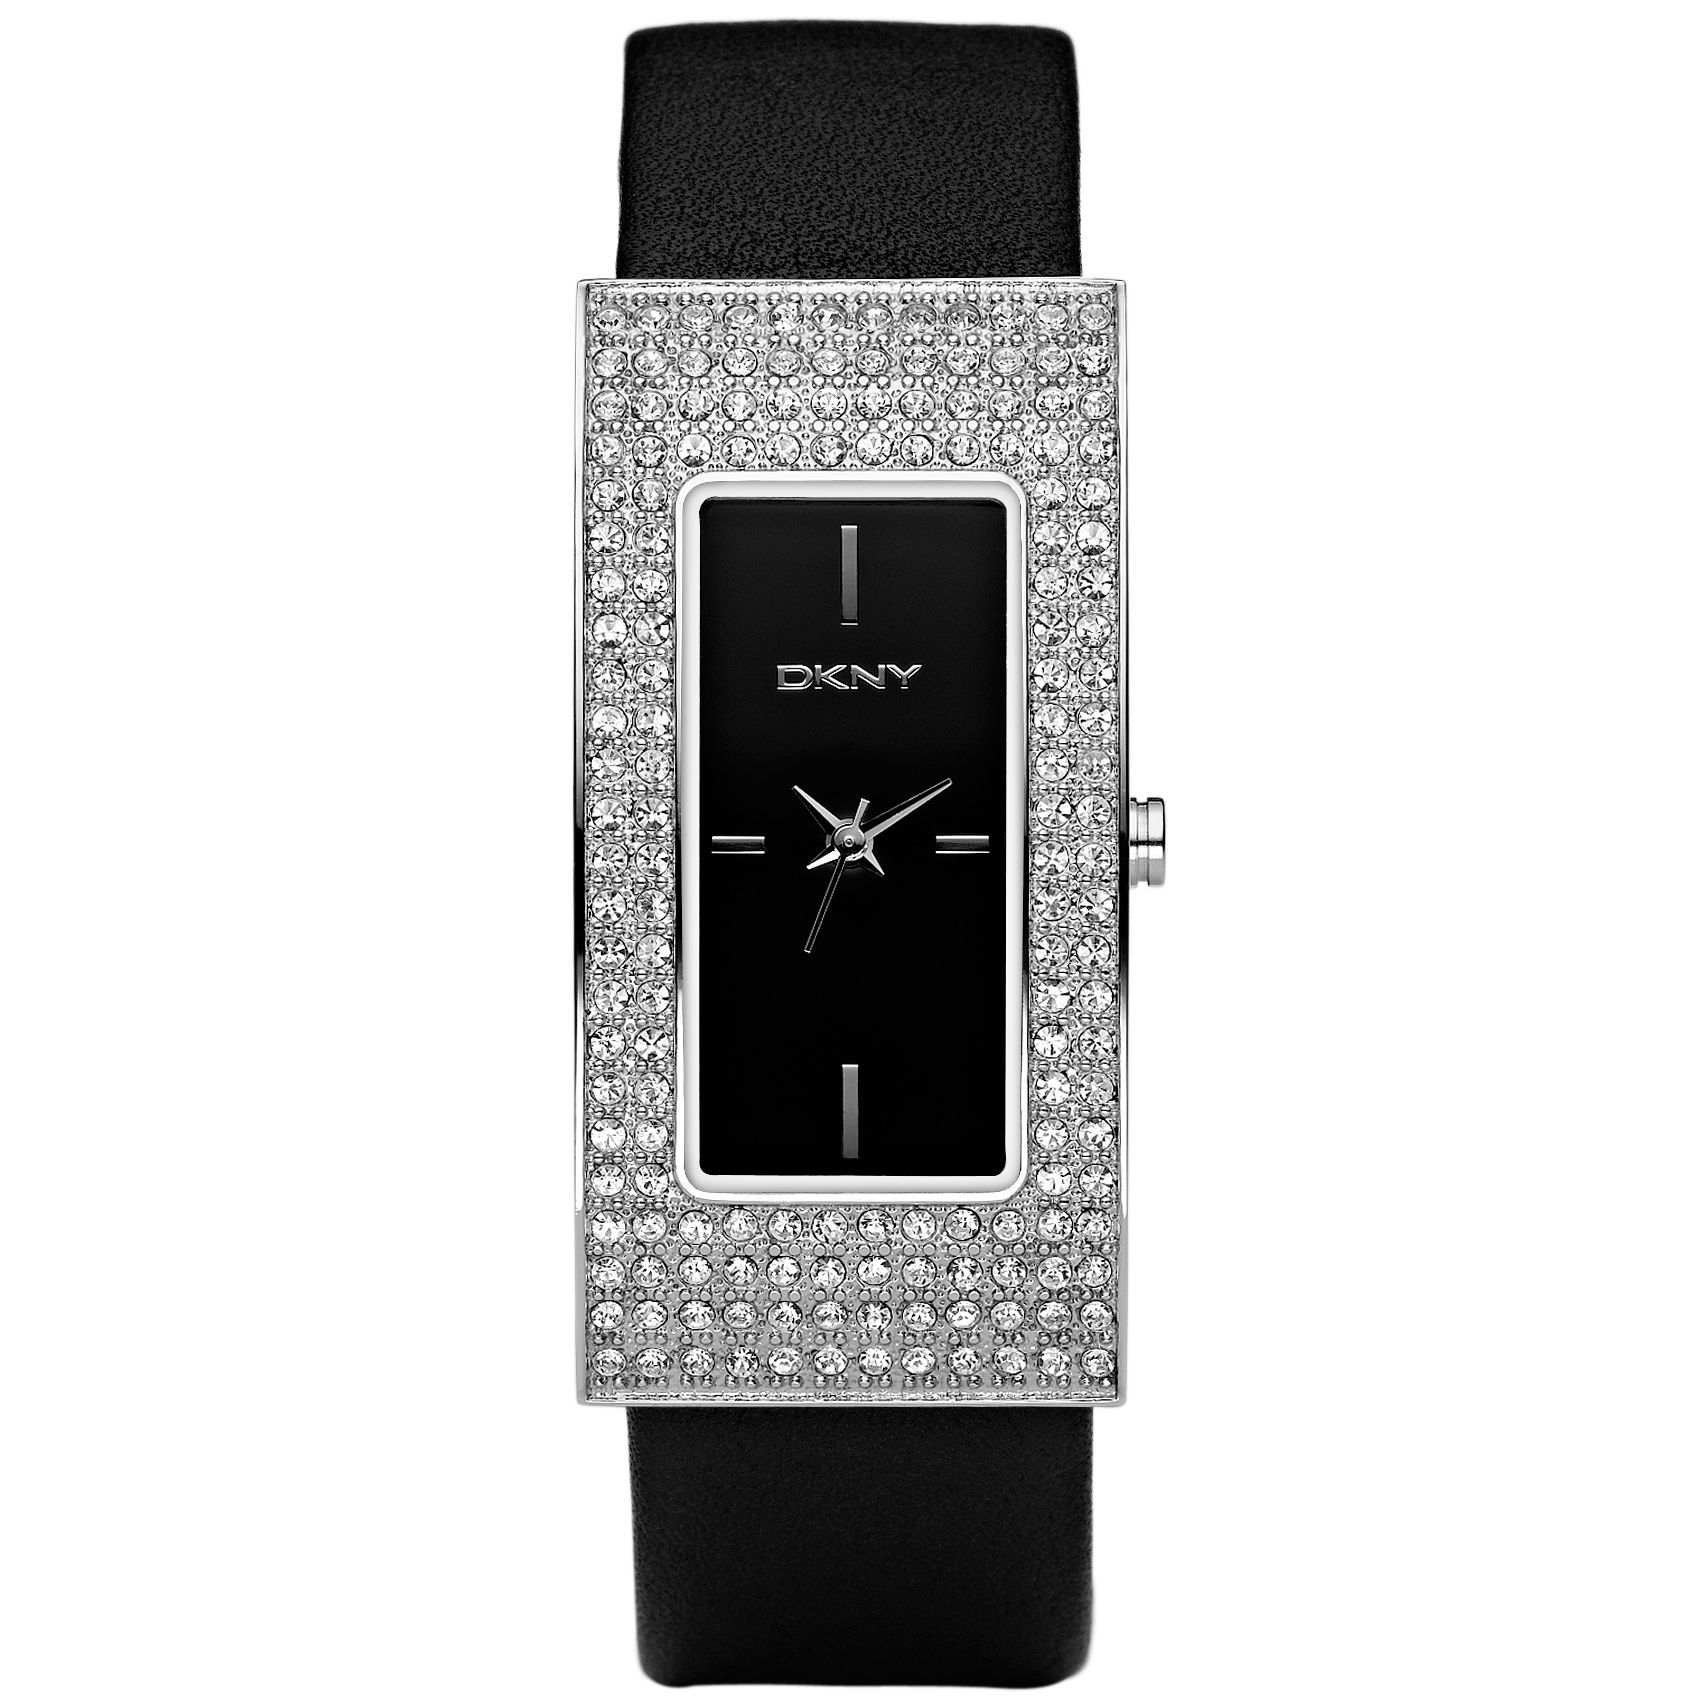 This DKNY women's watch